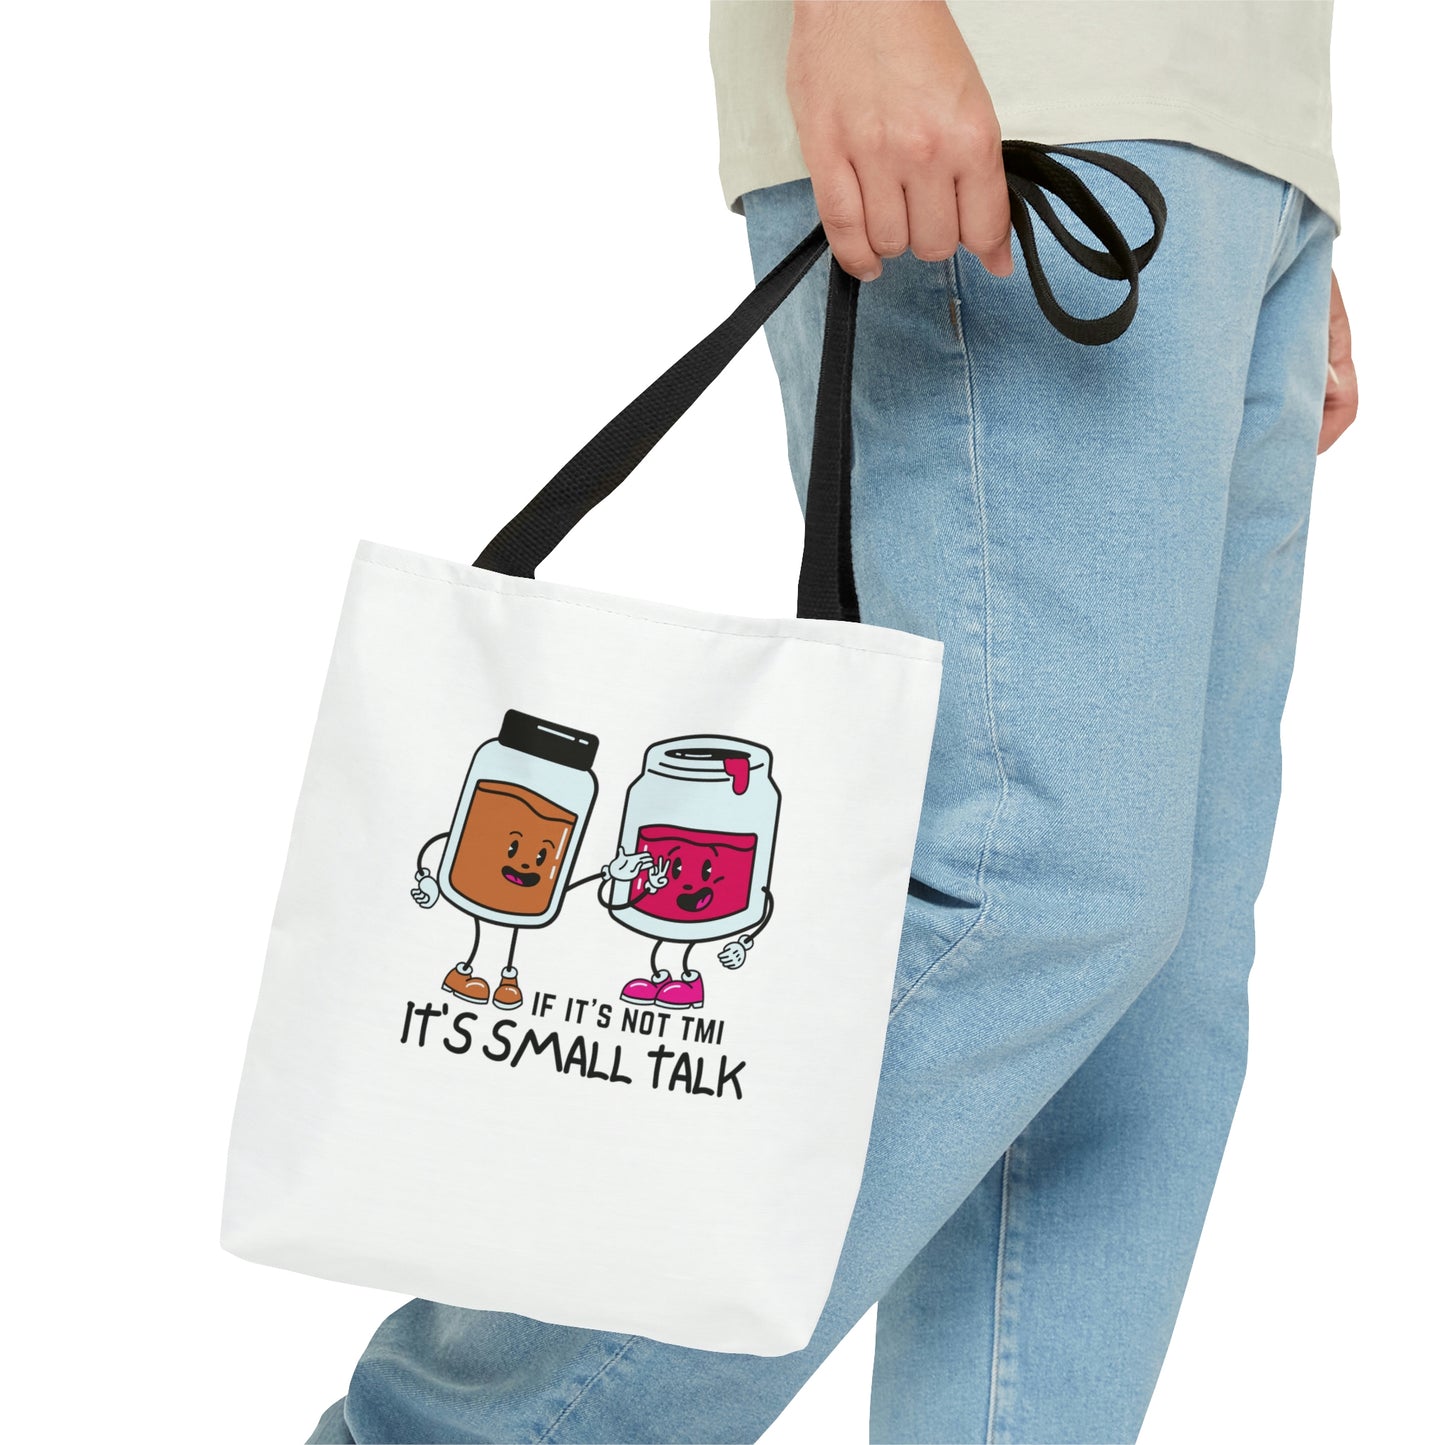 "If It's Not TMI, It's Small Talk" Tote Bag in 3 sizes